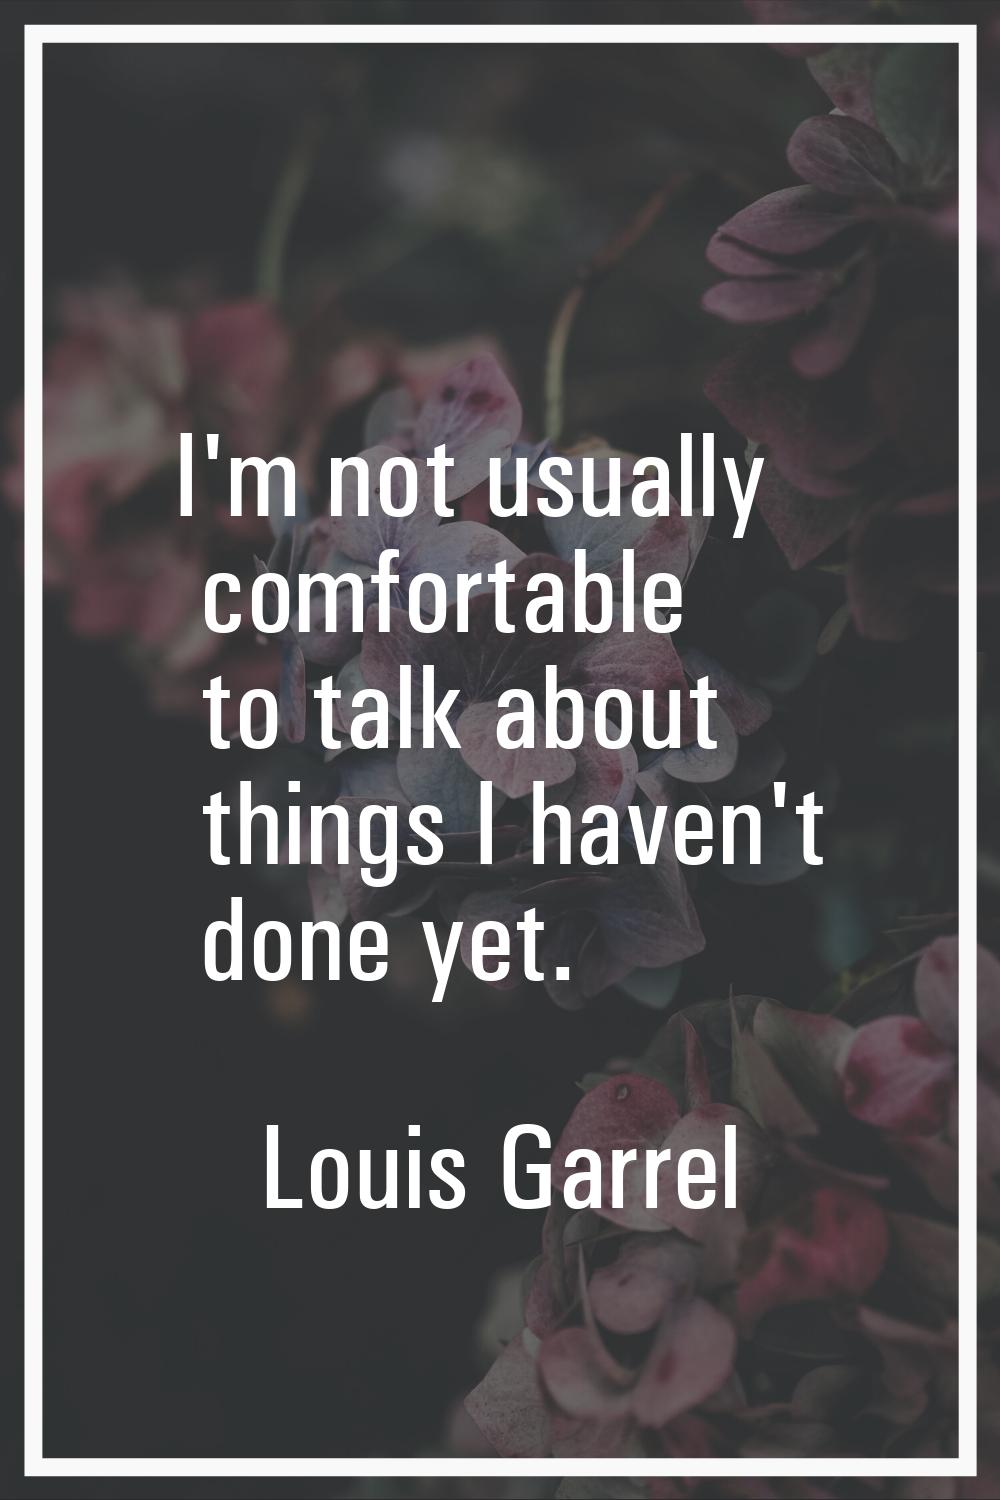 I'm not usually comfortable to talk about things I haven't done yet.